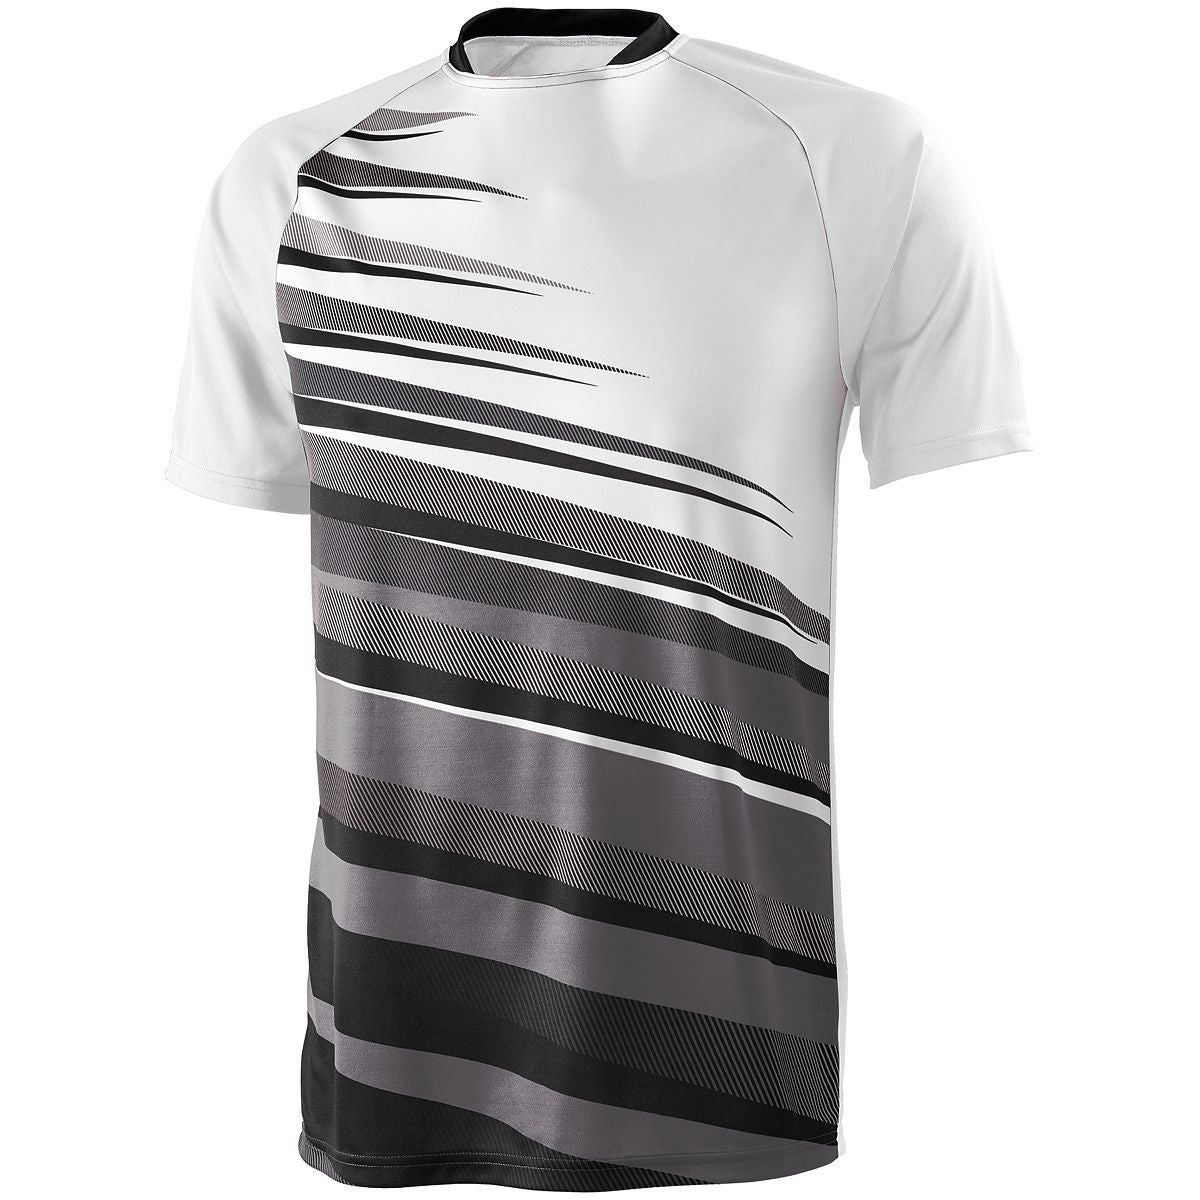 High 5 Youth Galactic Jersey in White/Black/Graphite  -Part of the Youth, Youth-Jersey, High5-Products, Soccer, Shirts, All-Sports-1 product lines at KanaleyCreations.com